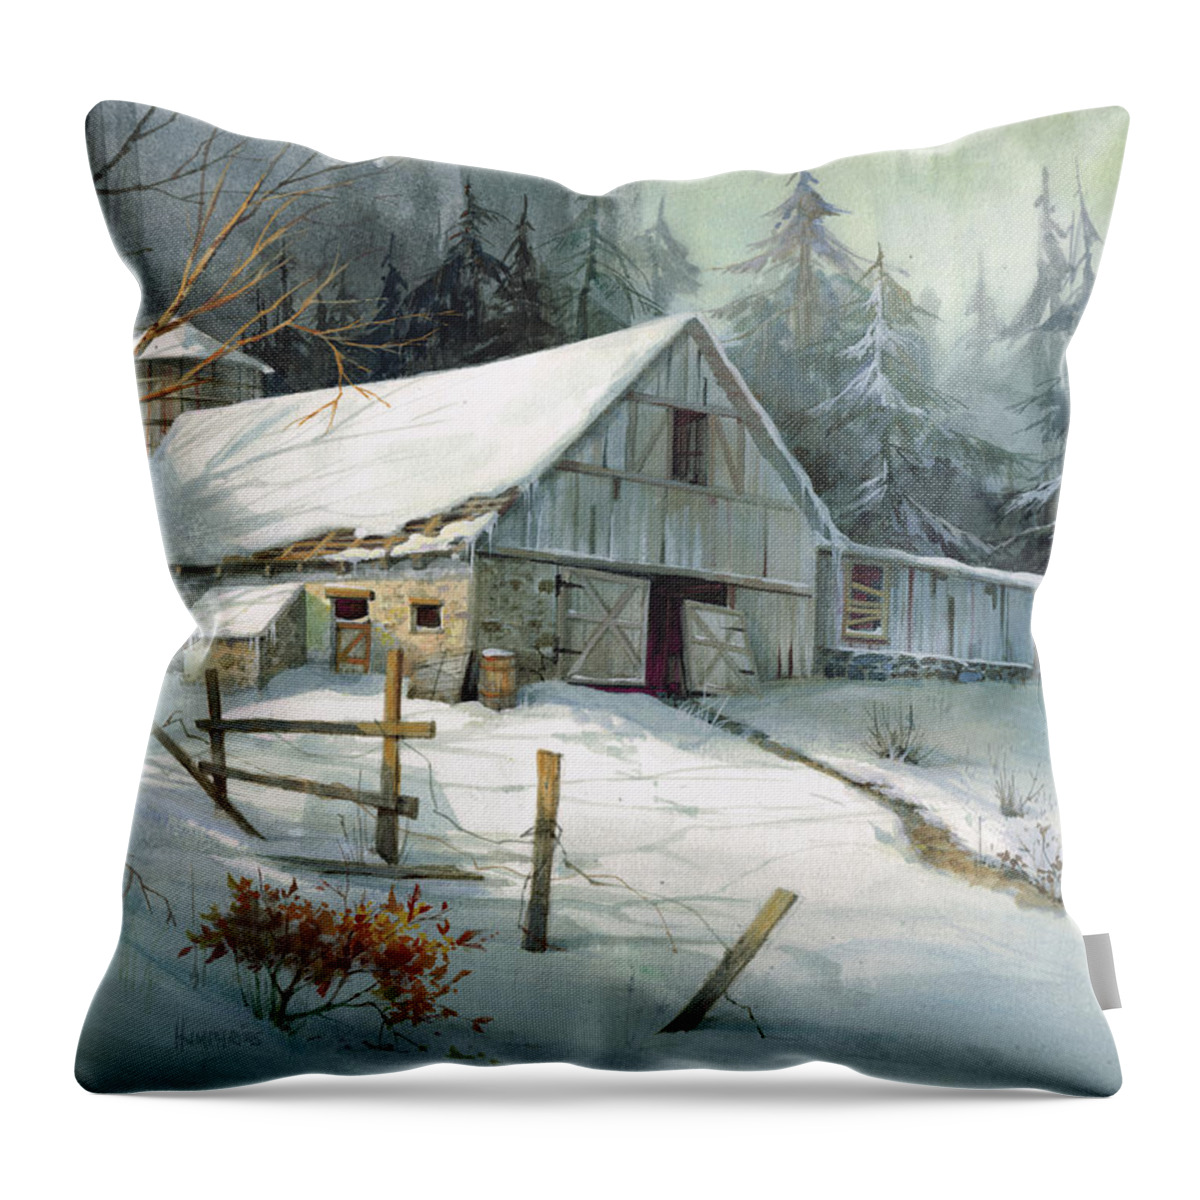 Michael Humphries Throw Pillow featuring the painting Ageless Beauty by Michael Humphries